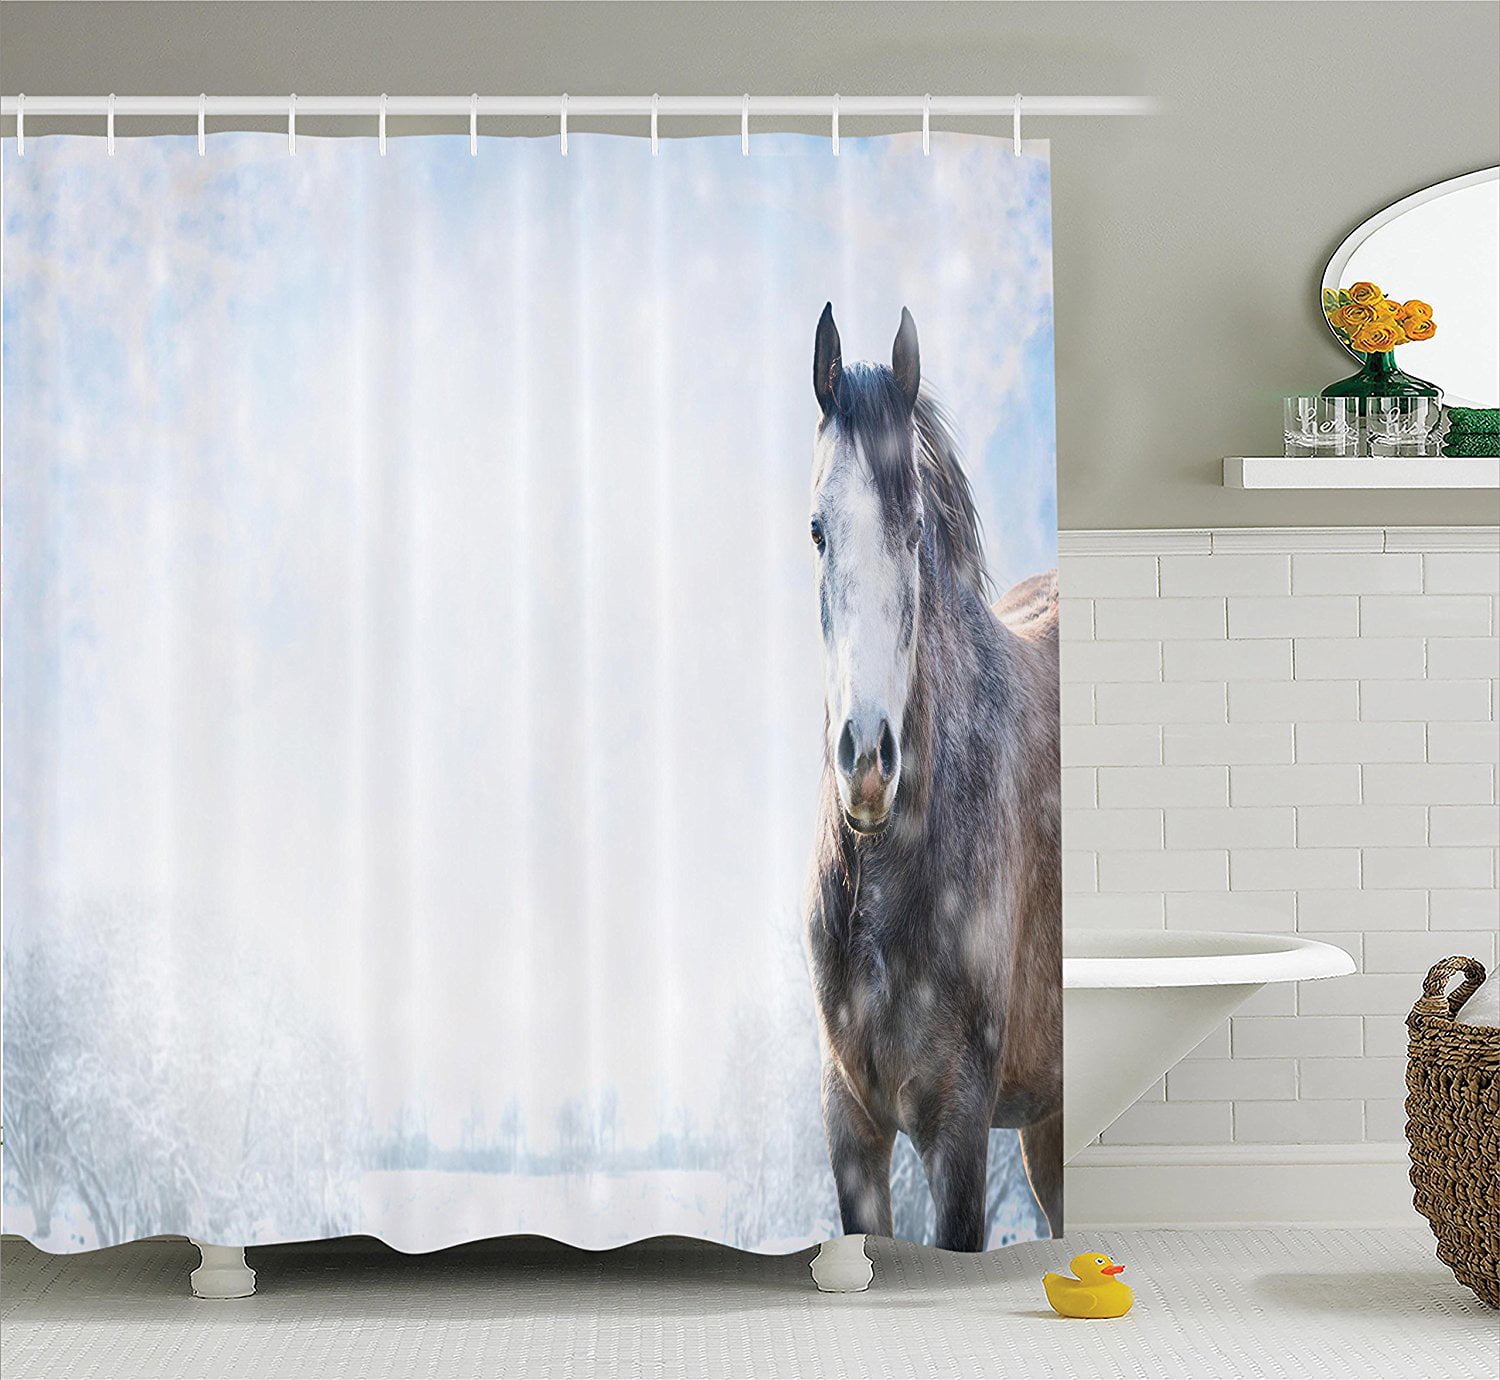 Horse Race Fabric Shower Curtain Set Polyester Curtains Bathroom Accessories New 